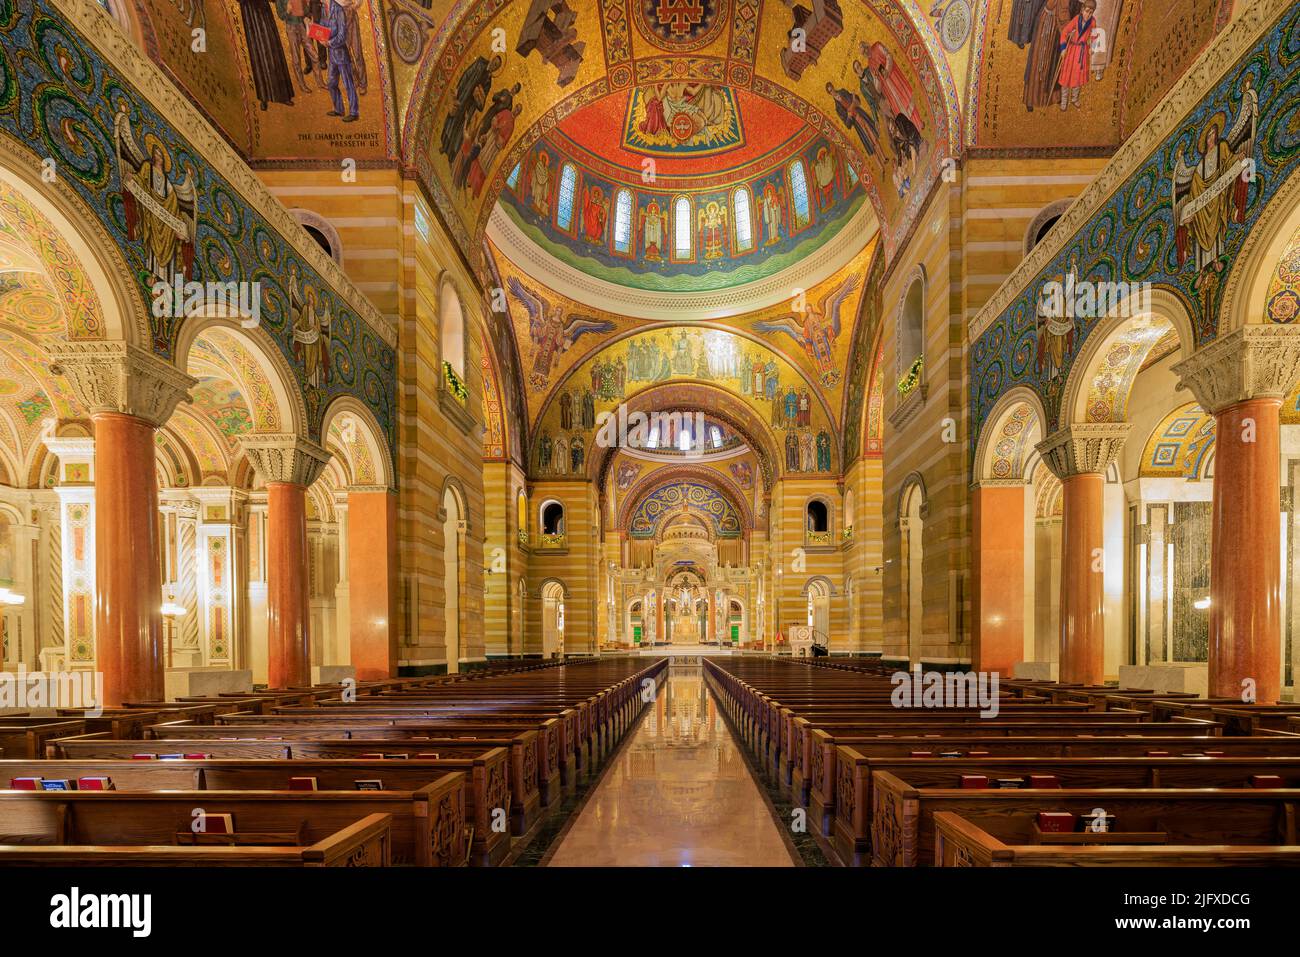 65095-03605 Interior of The Cathedral Basilica of Saint Louis, St. Louis MO Stock Photo